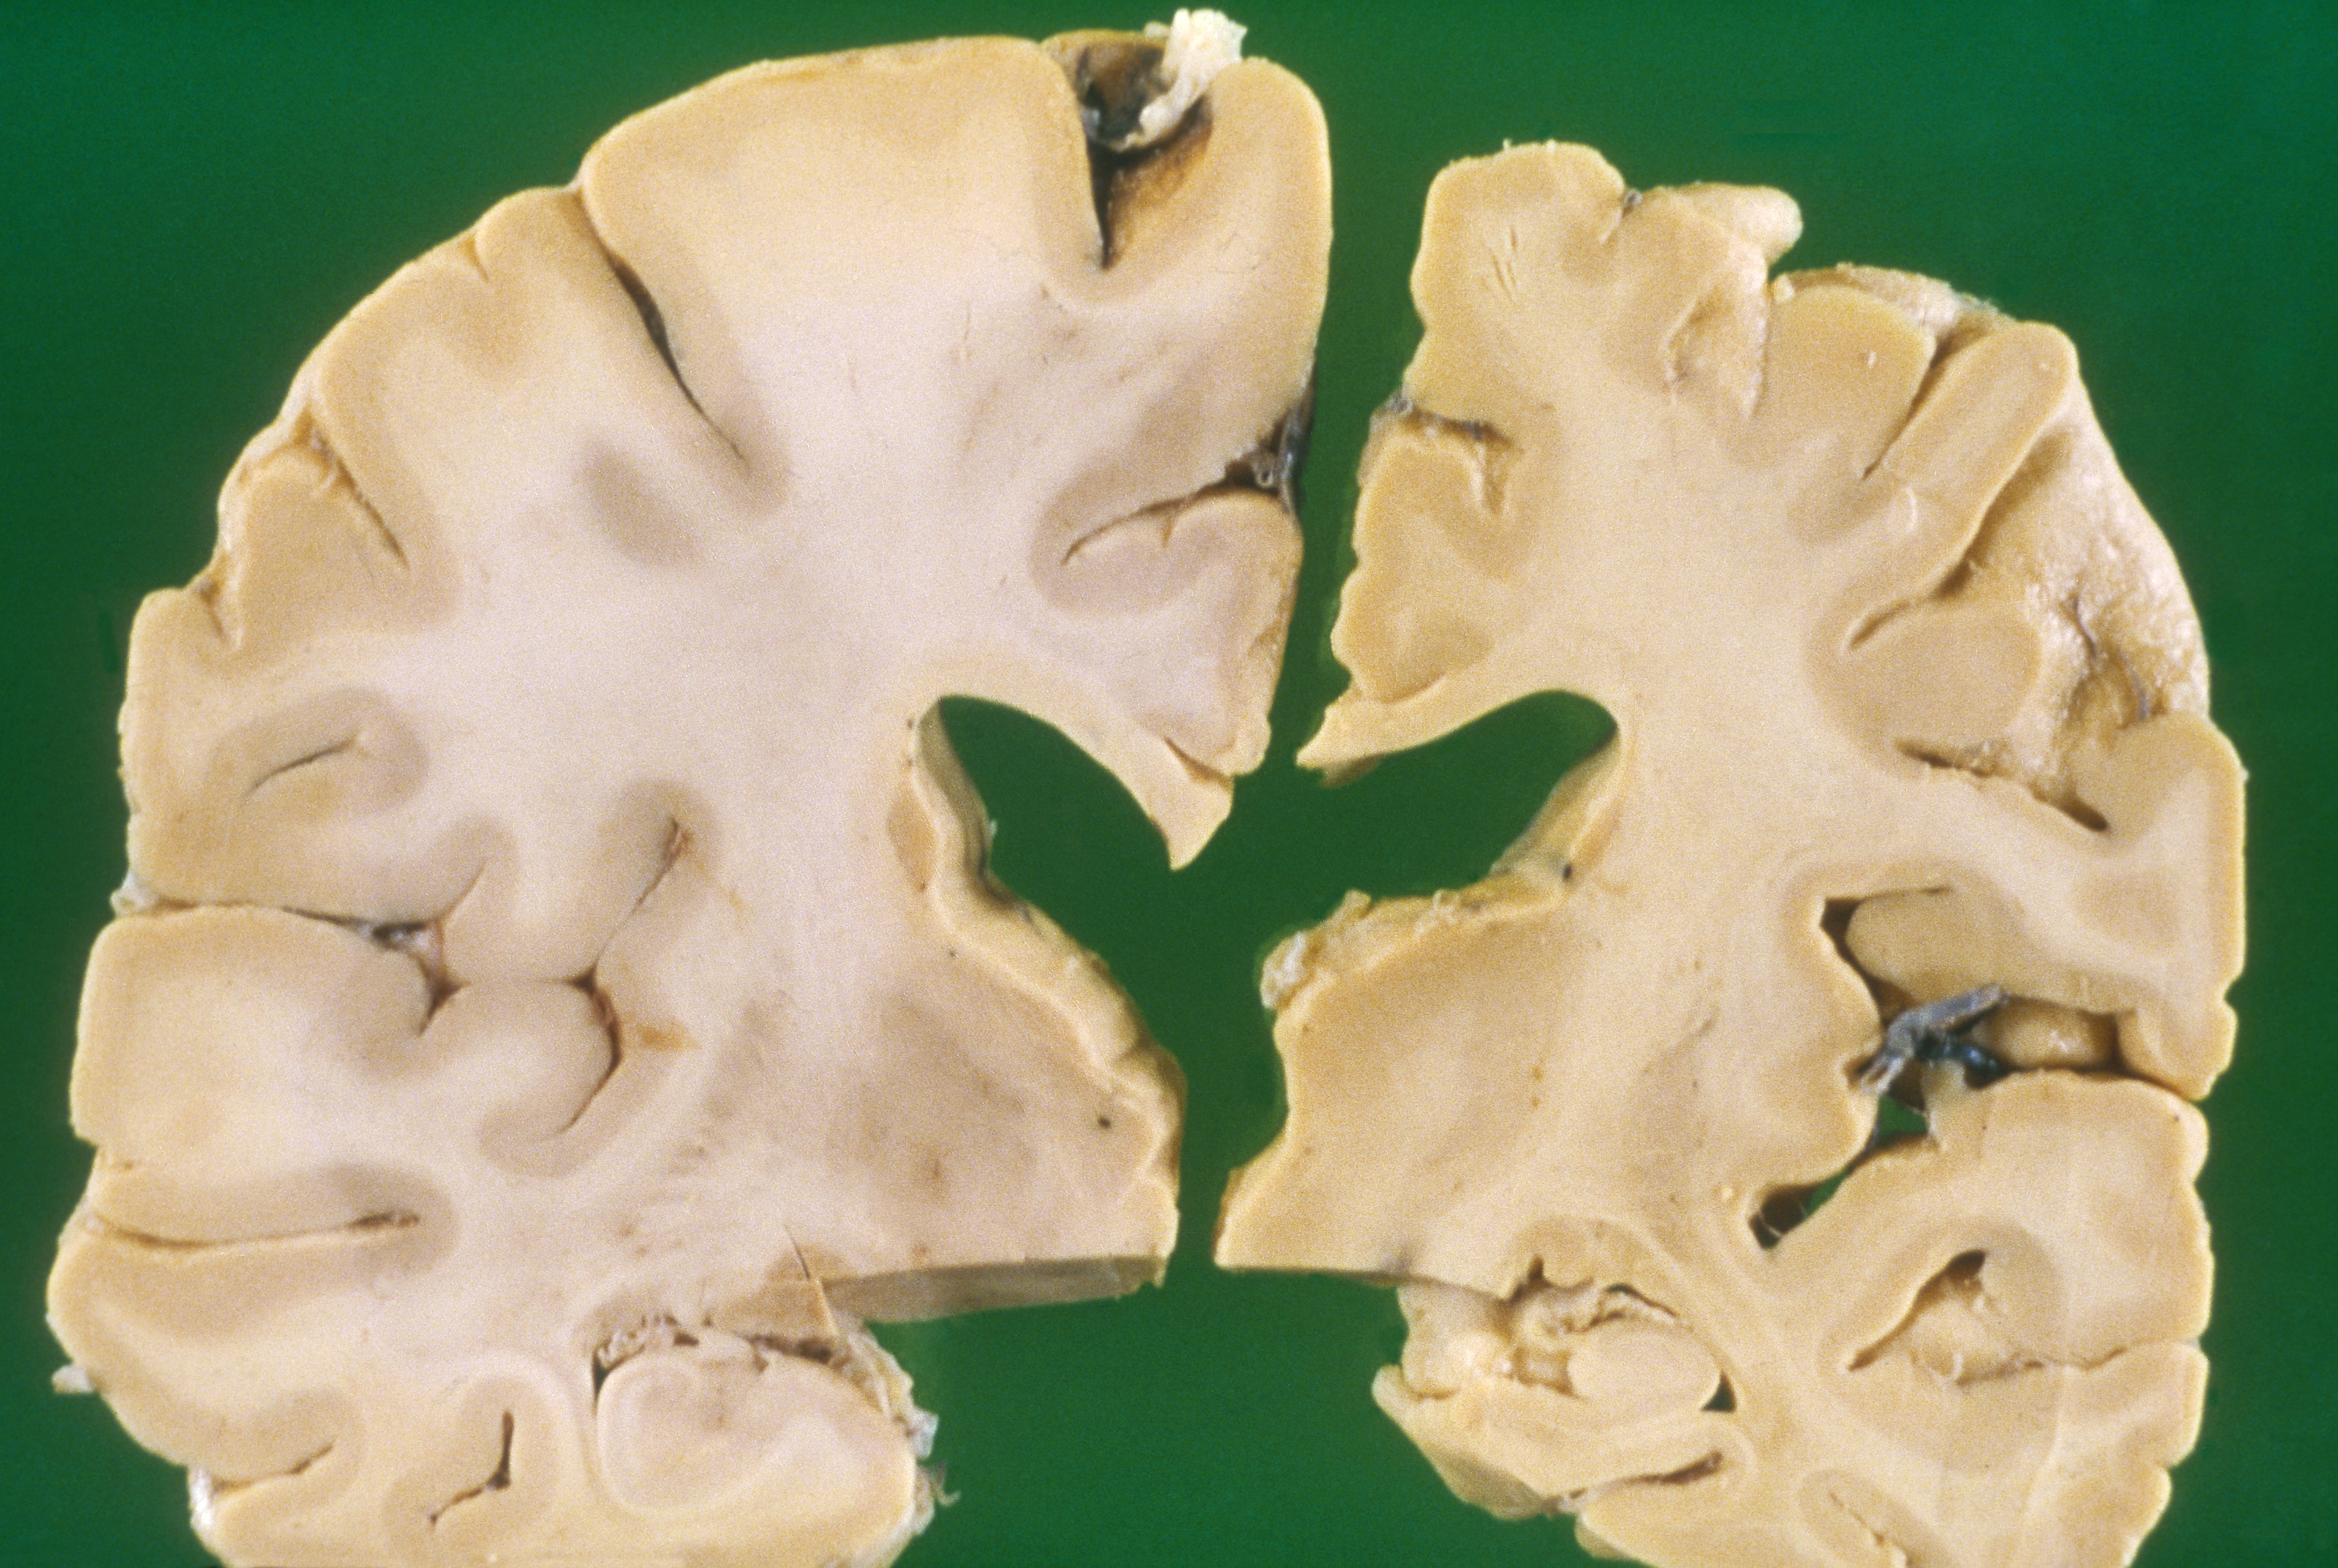 A slice of brain from an Alzheimer’s patient is compared to a slice from a normal adult.